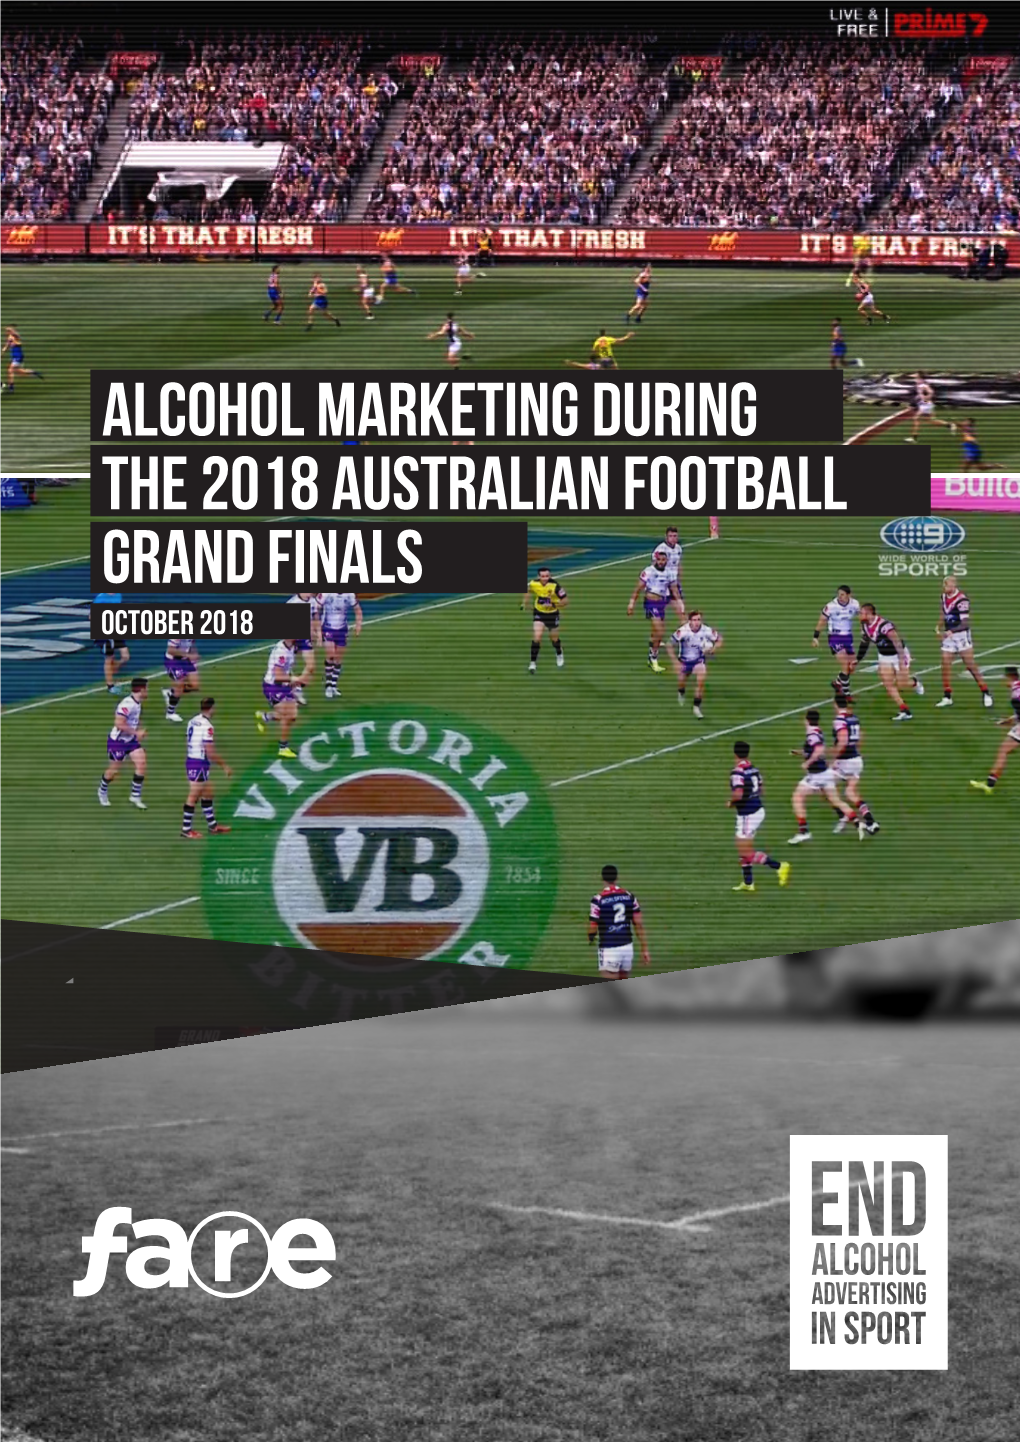 Alcohol Marketing During the 2018 Australian Football Grand Finals